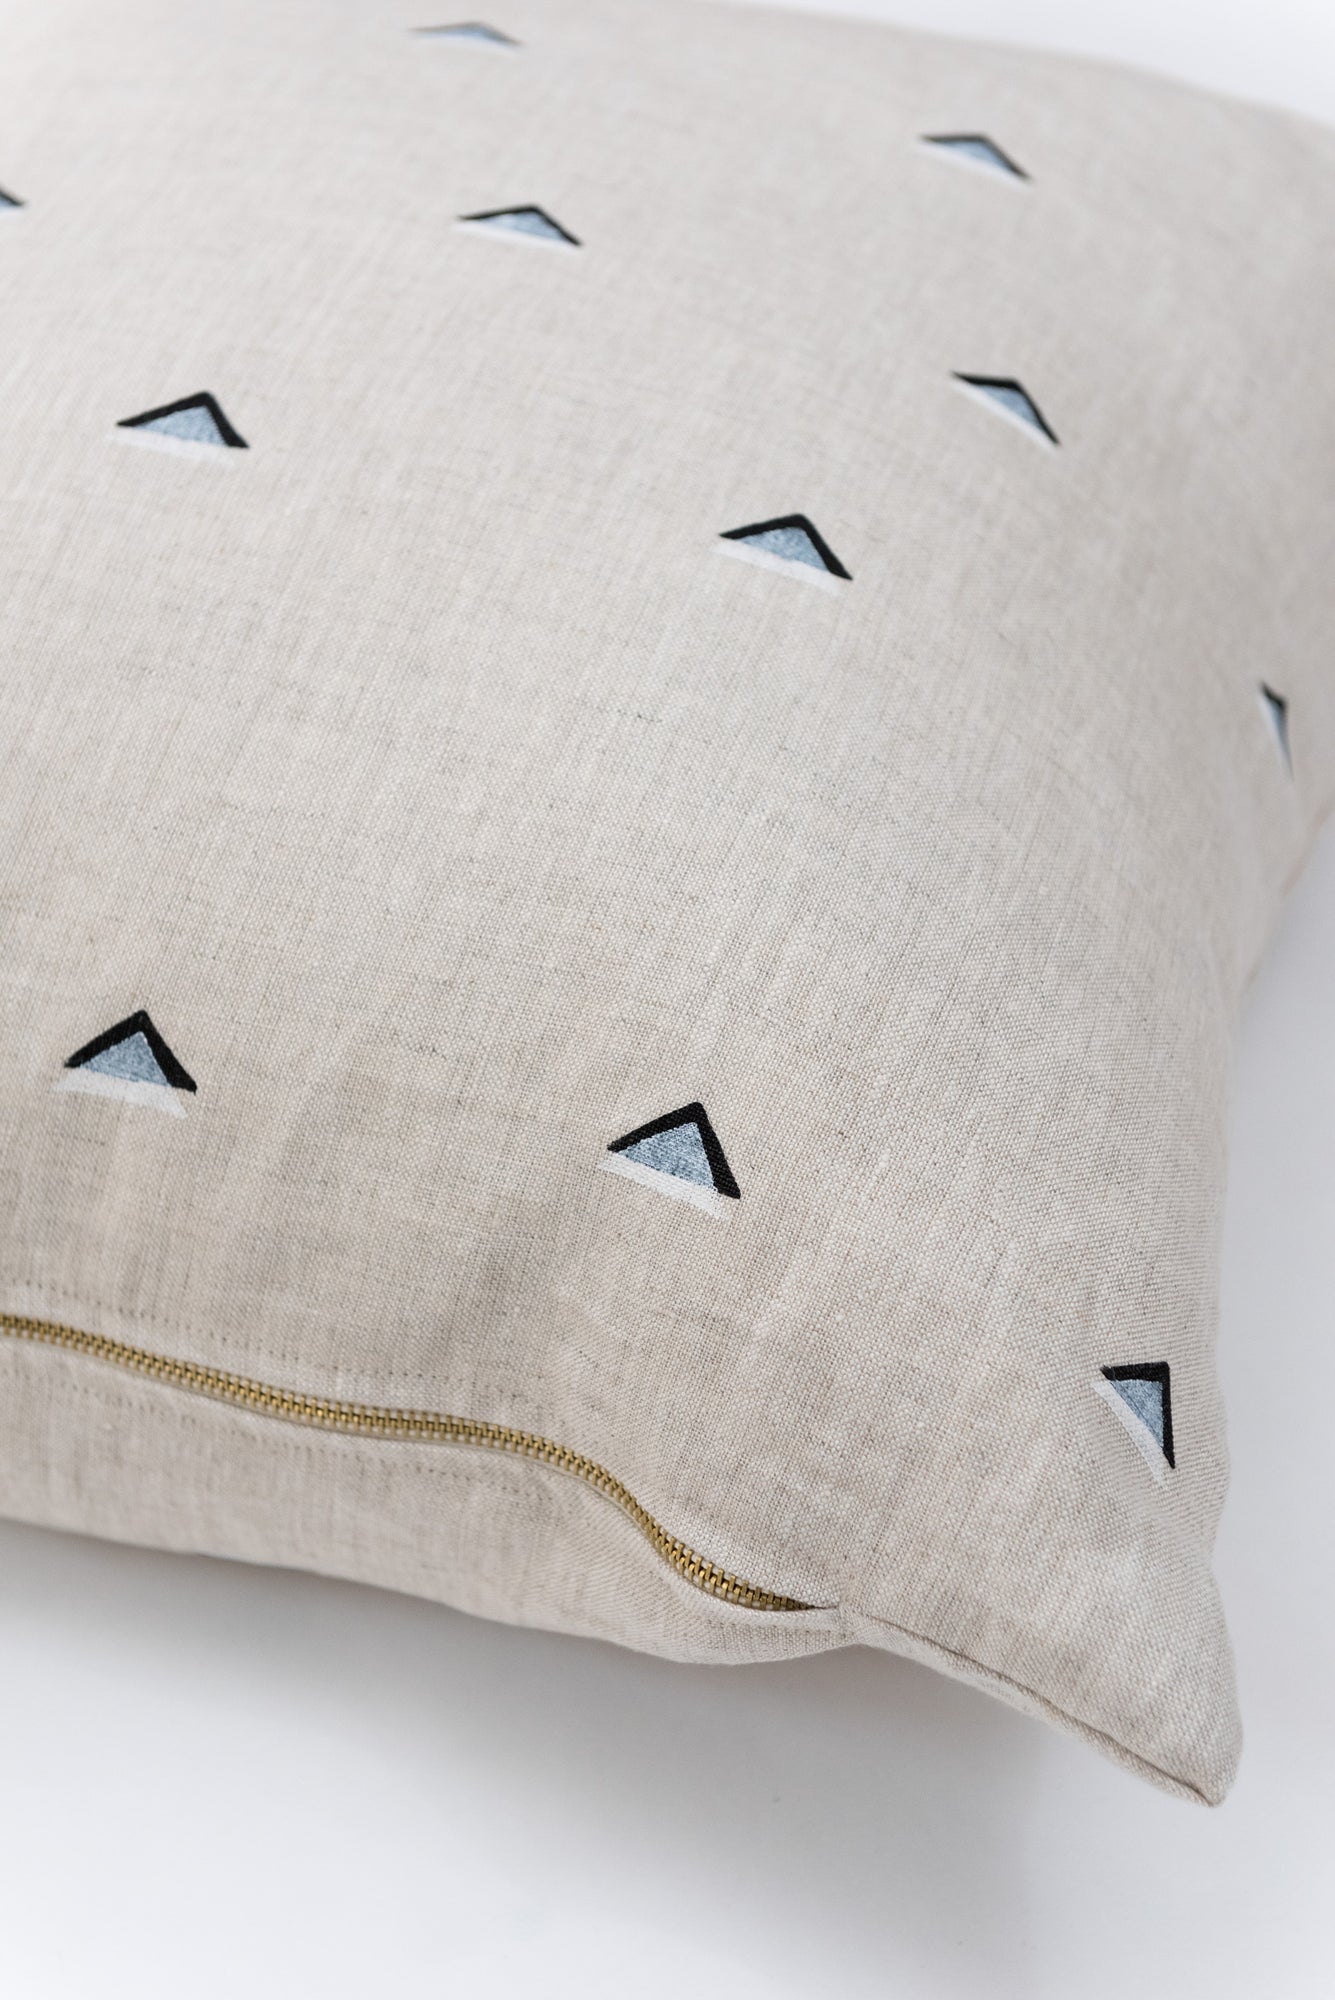 Double Triangle Pillow